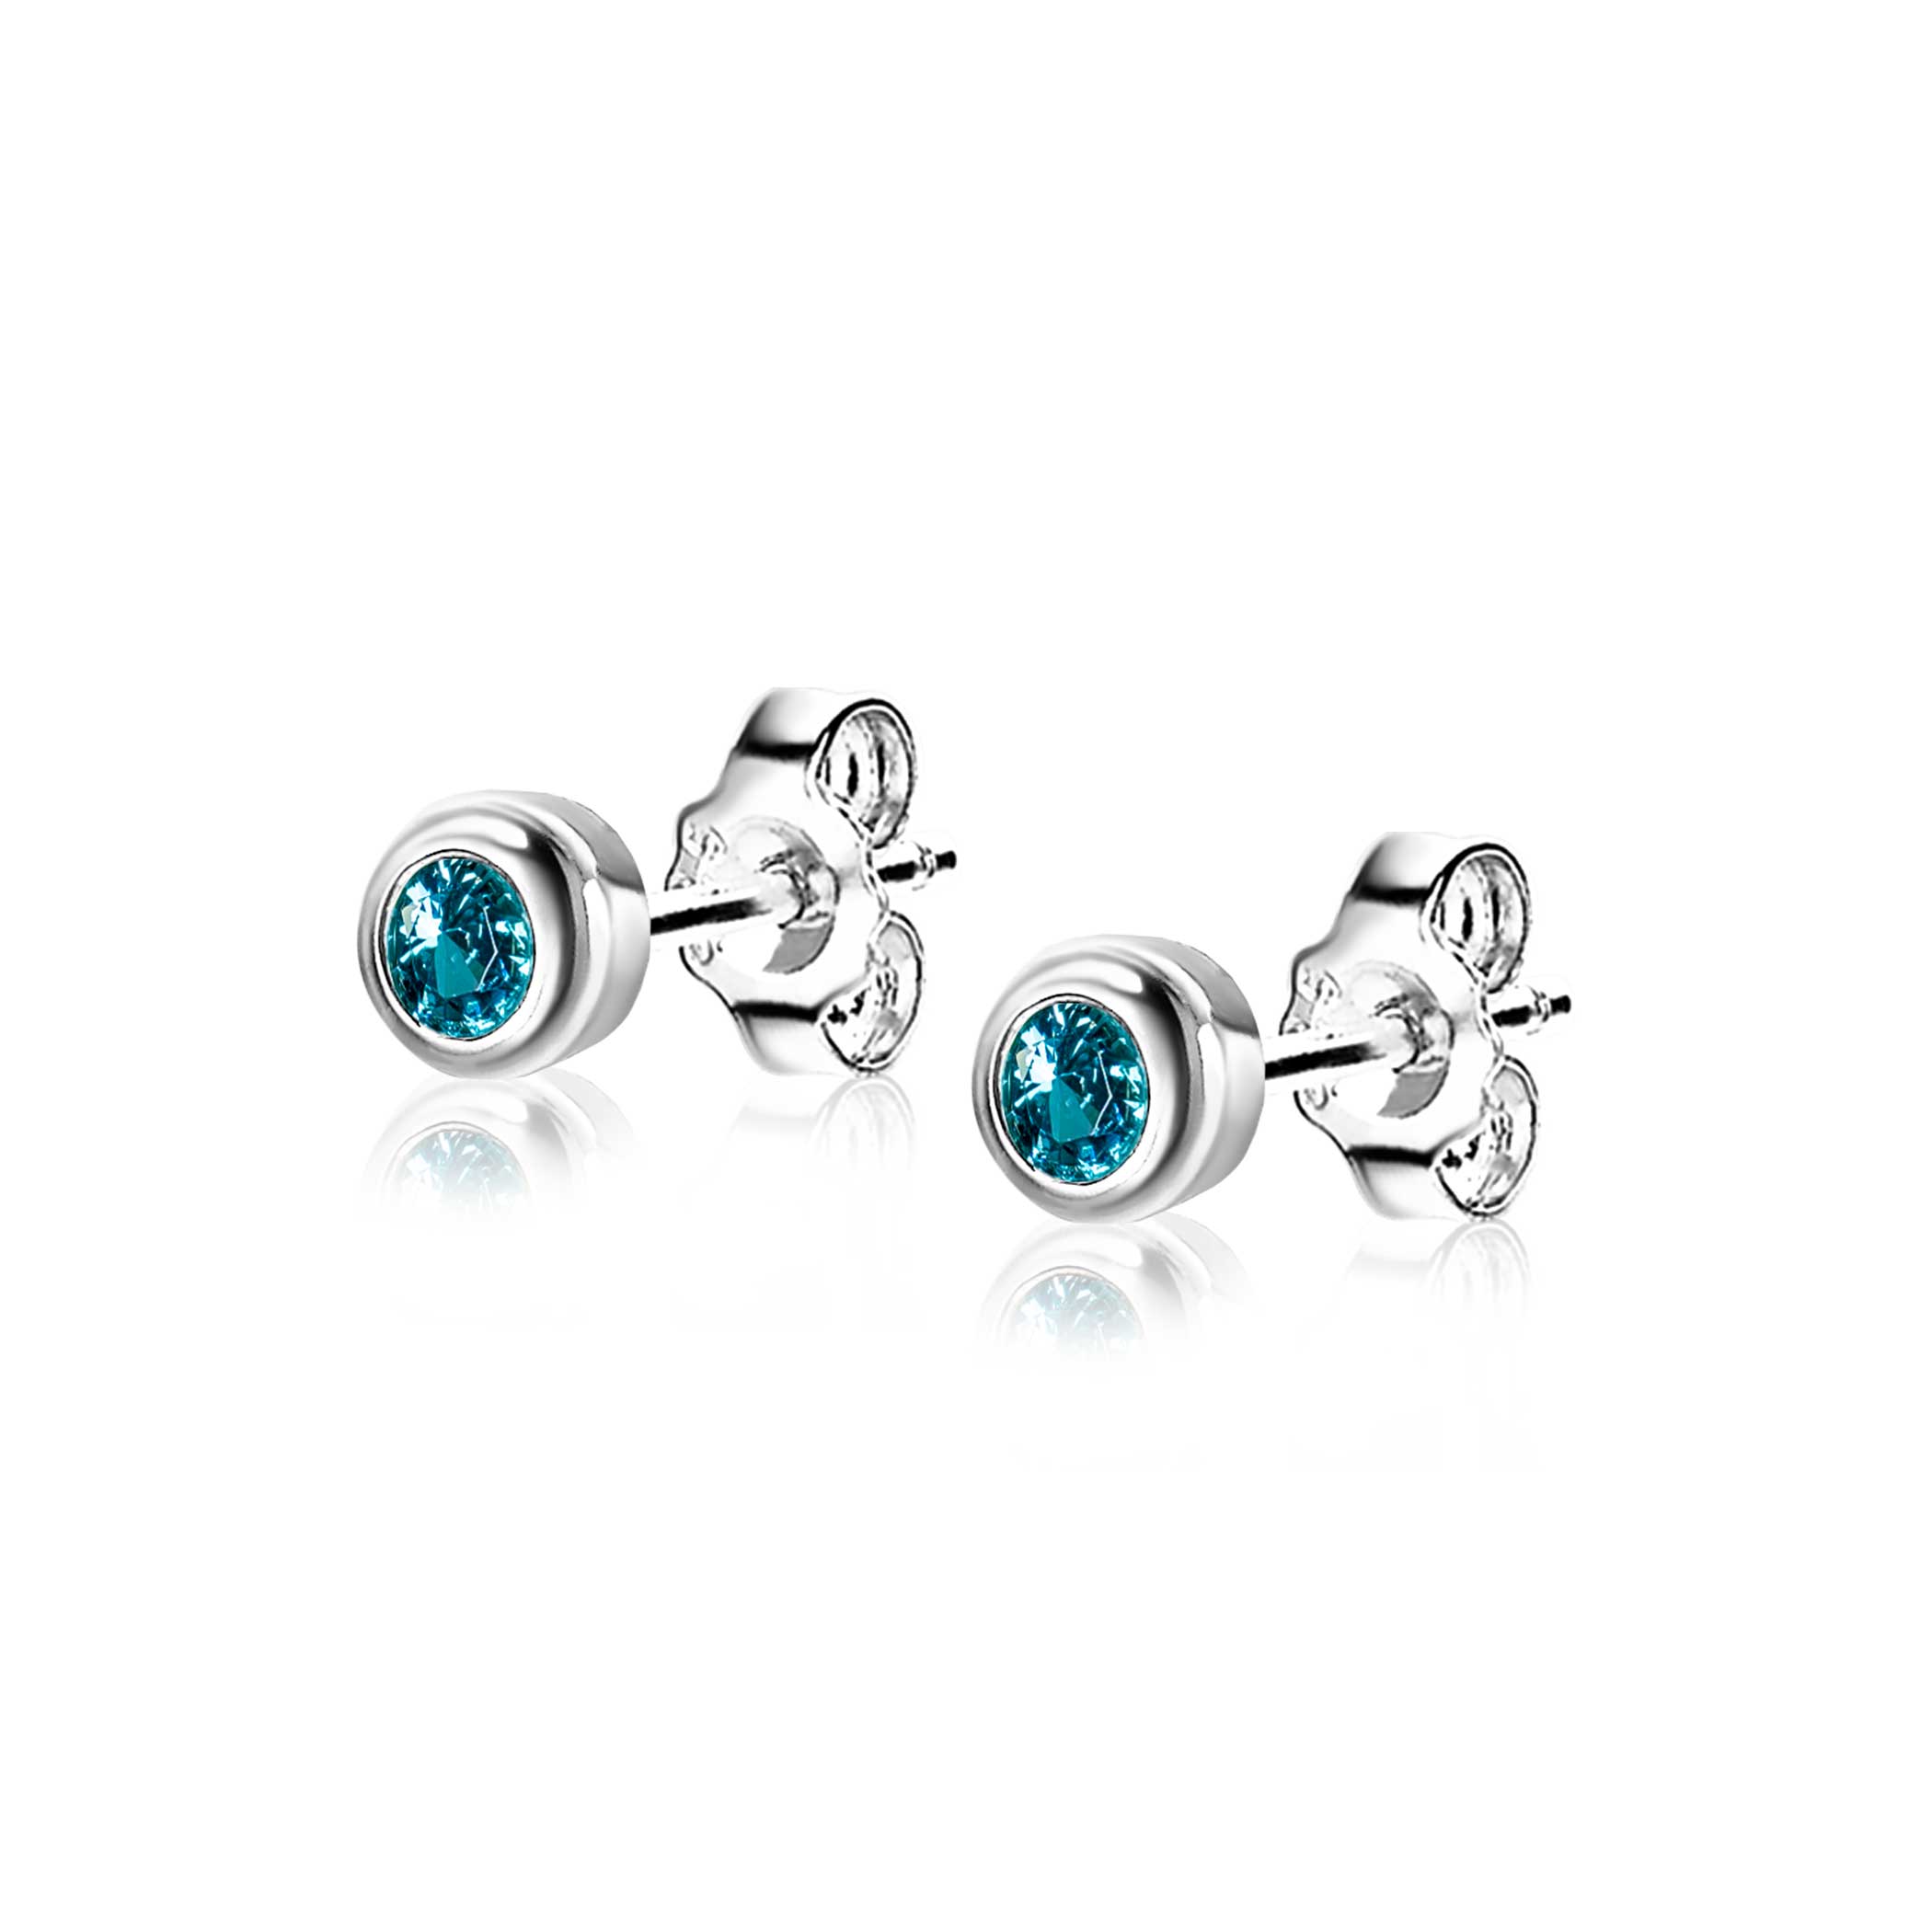 MARCH Stud Earrings 4mm Sterling Silver with Birthstone Blue Aquamarine Zirconia